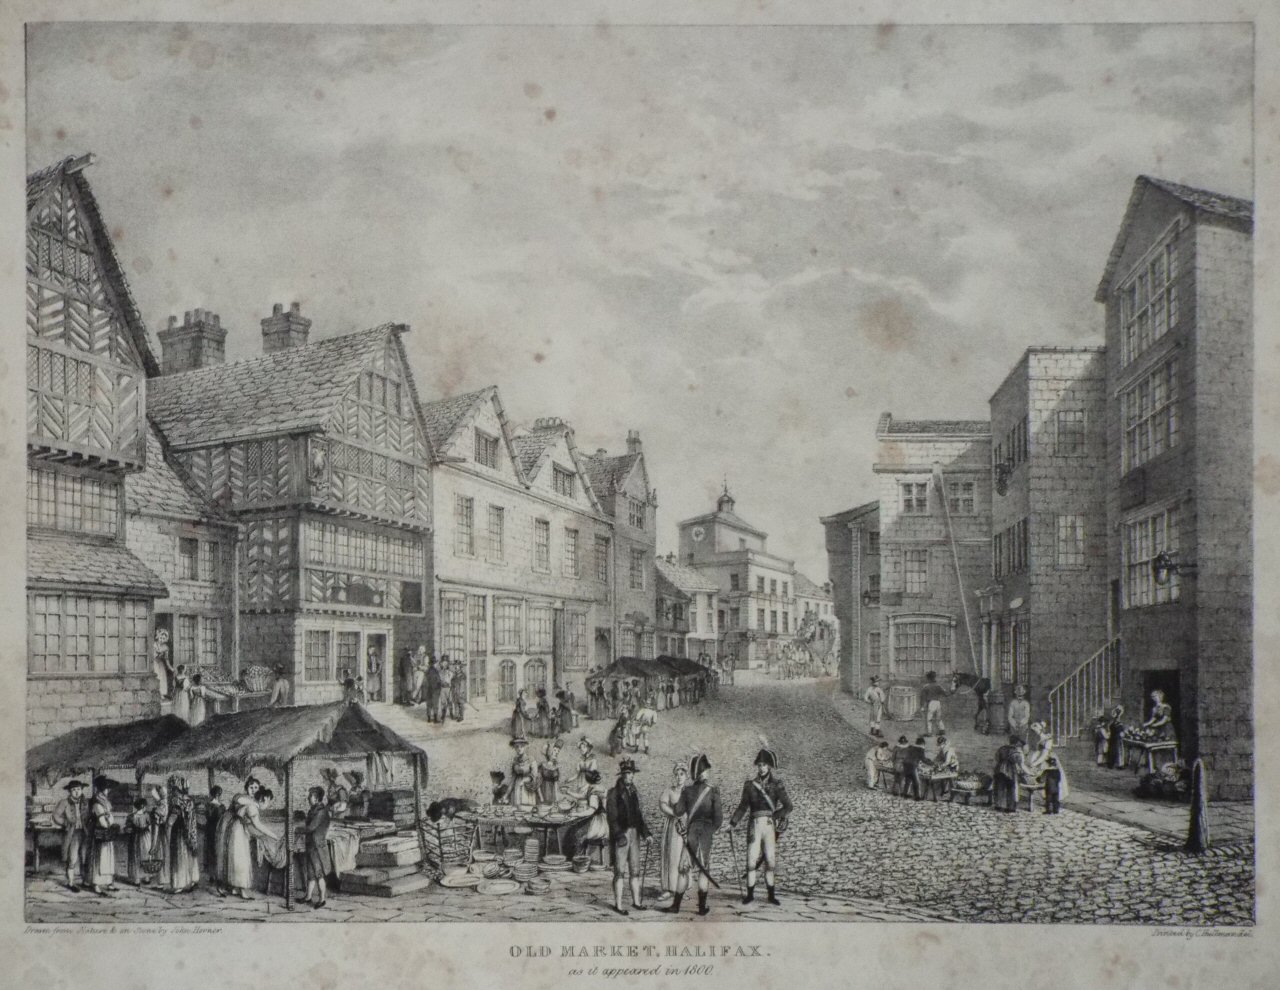 Lithograph - Old Market, Halifax. as it appeared in 1800. - Horner